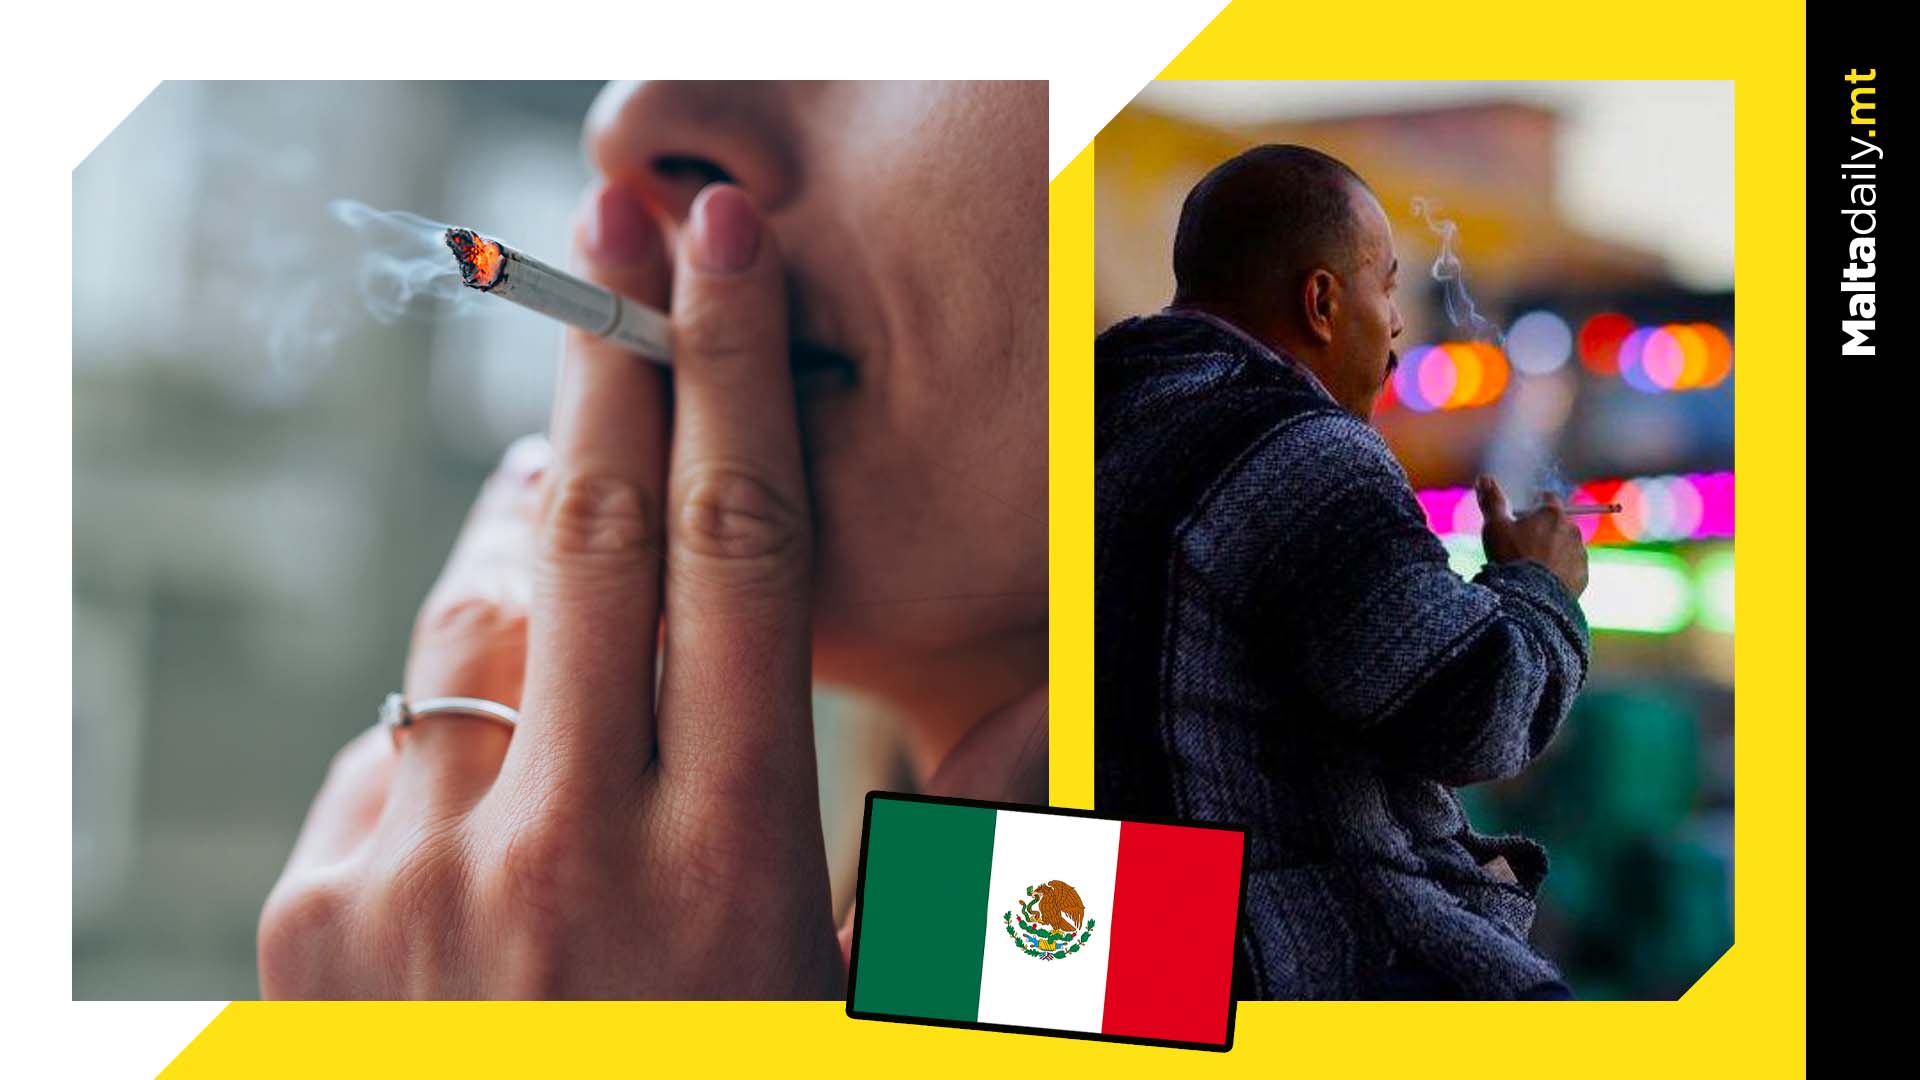 Total ban on smoking in public spaces in Mexico